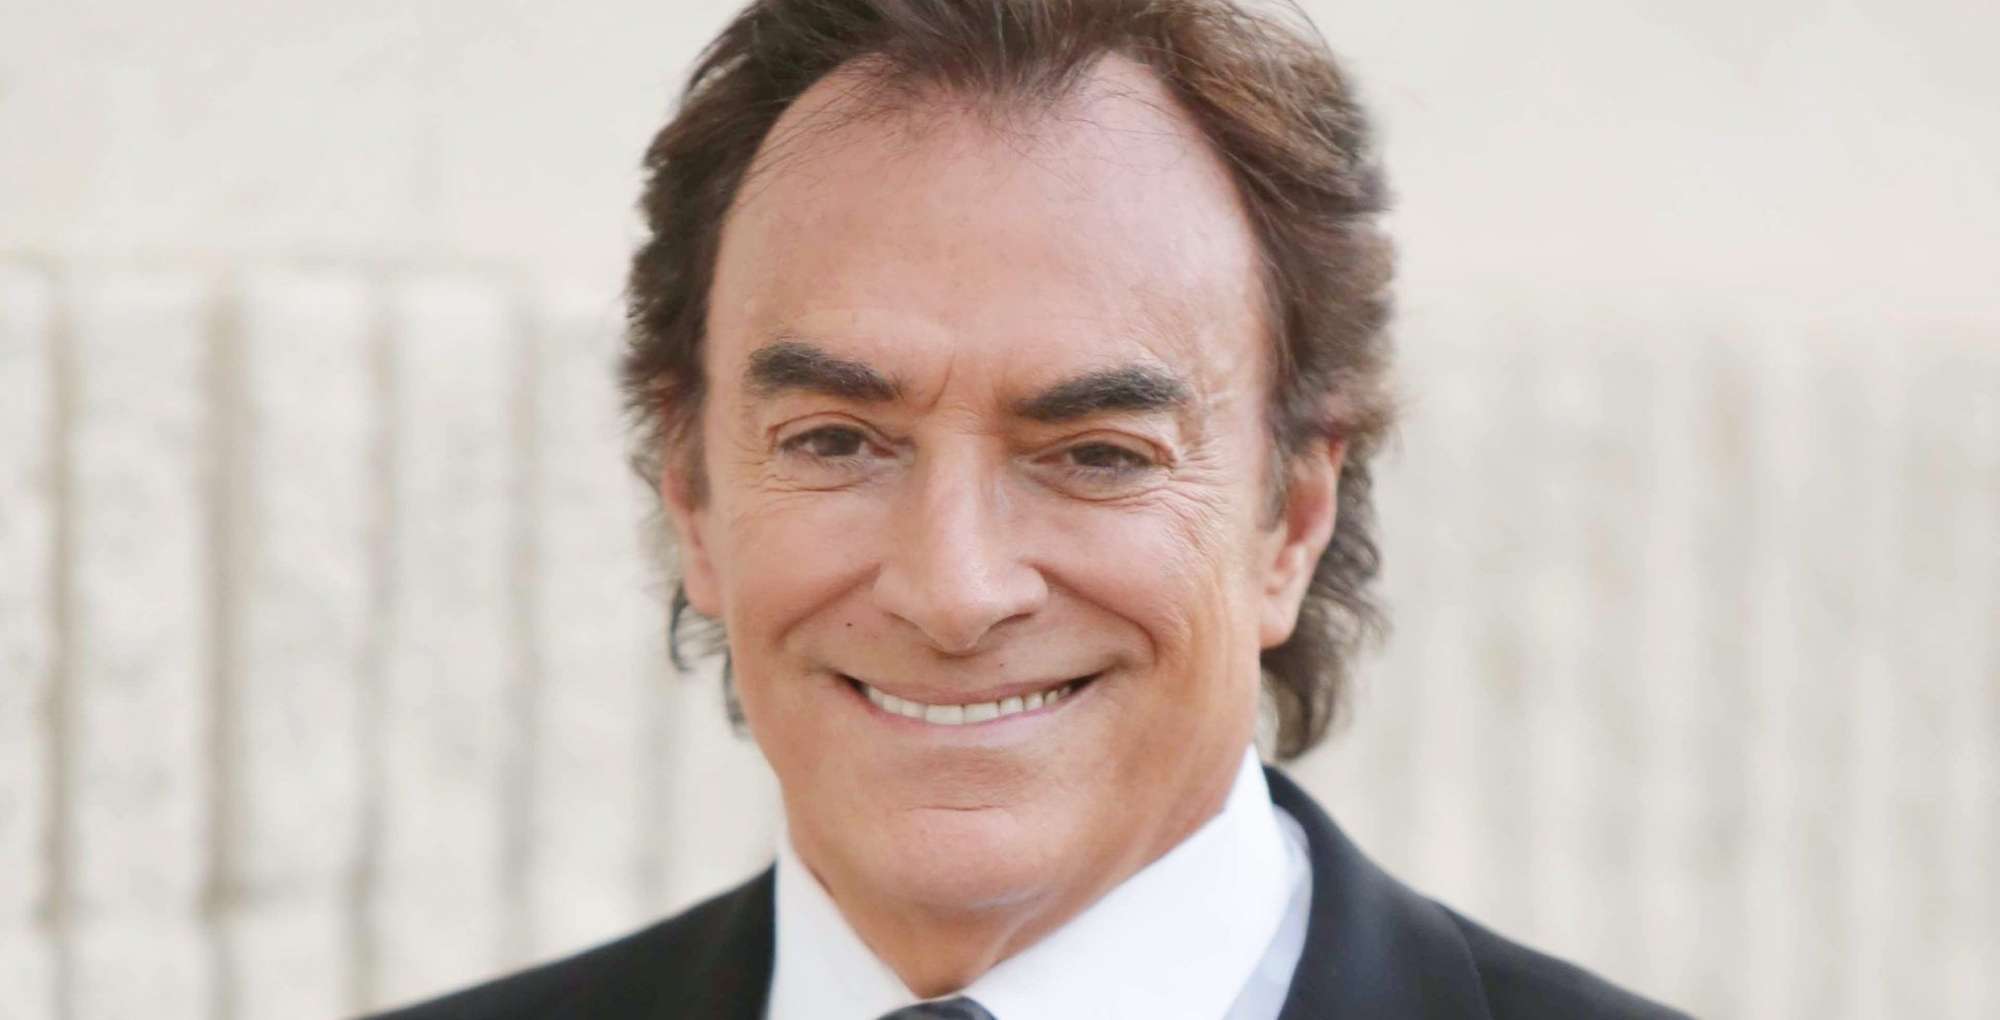 thaao penghlis days of our lives